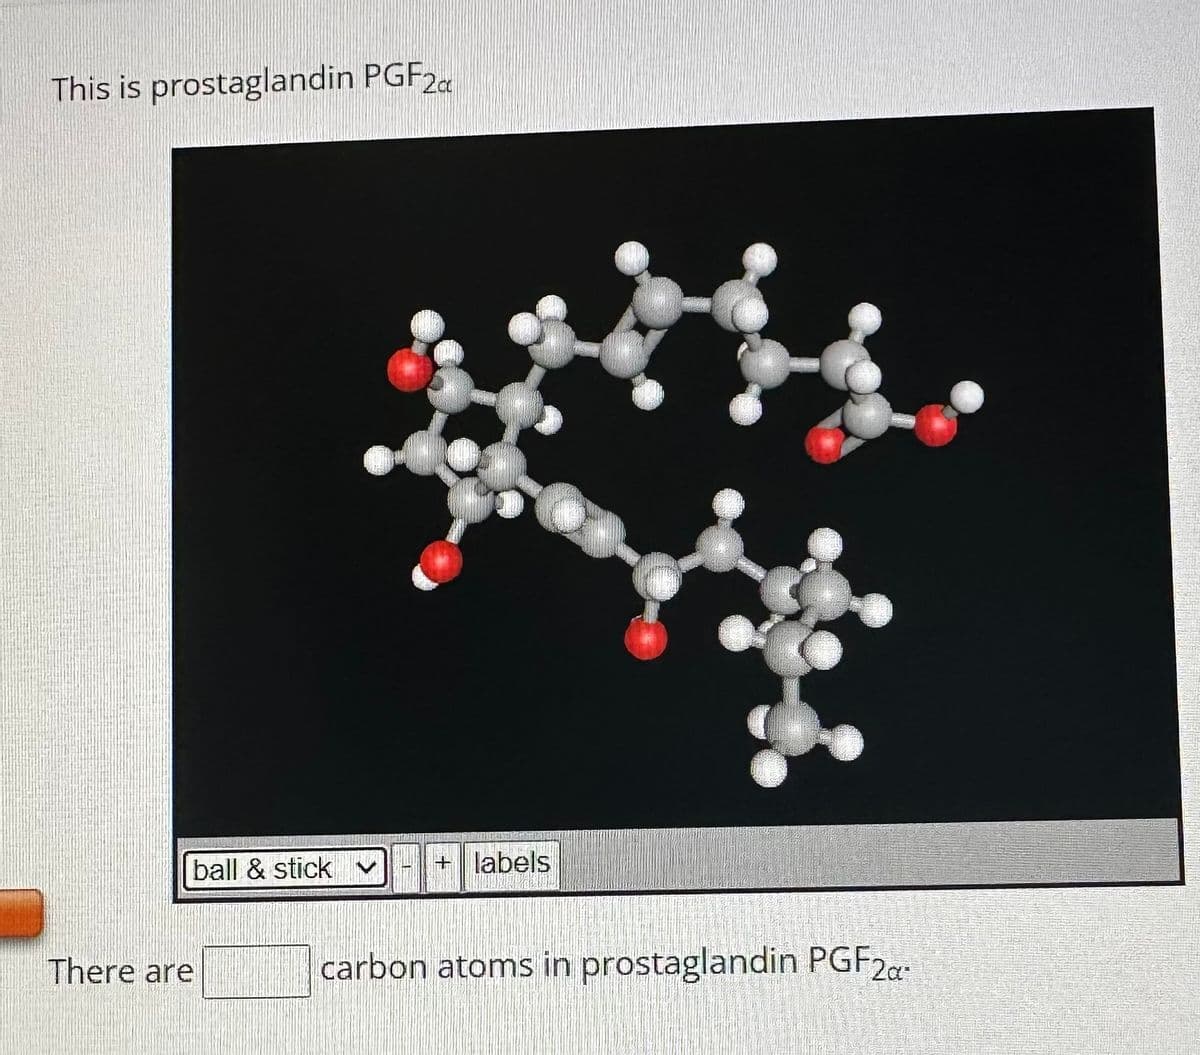 This is prostaglandin PGF2c
ball & stick
There are
+
labels
carbon atoms in prostaglandin PGF2α-